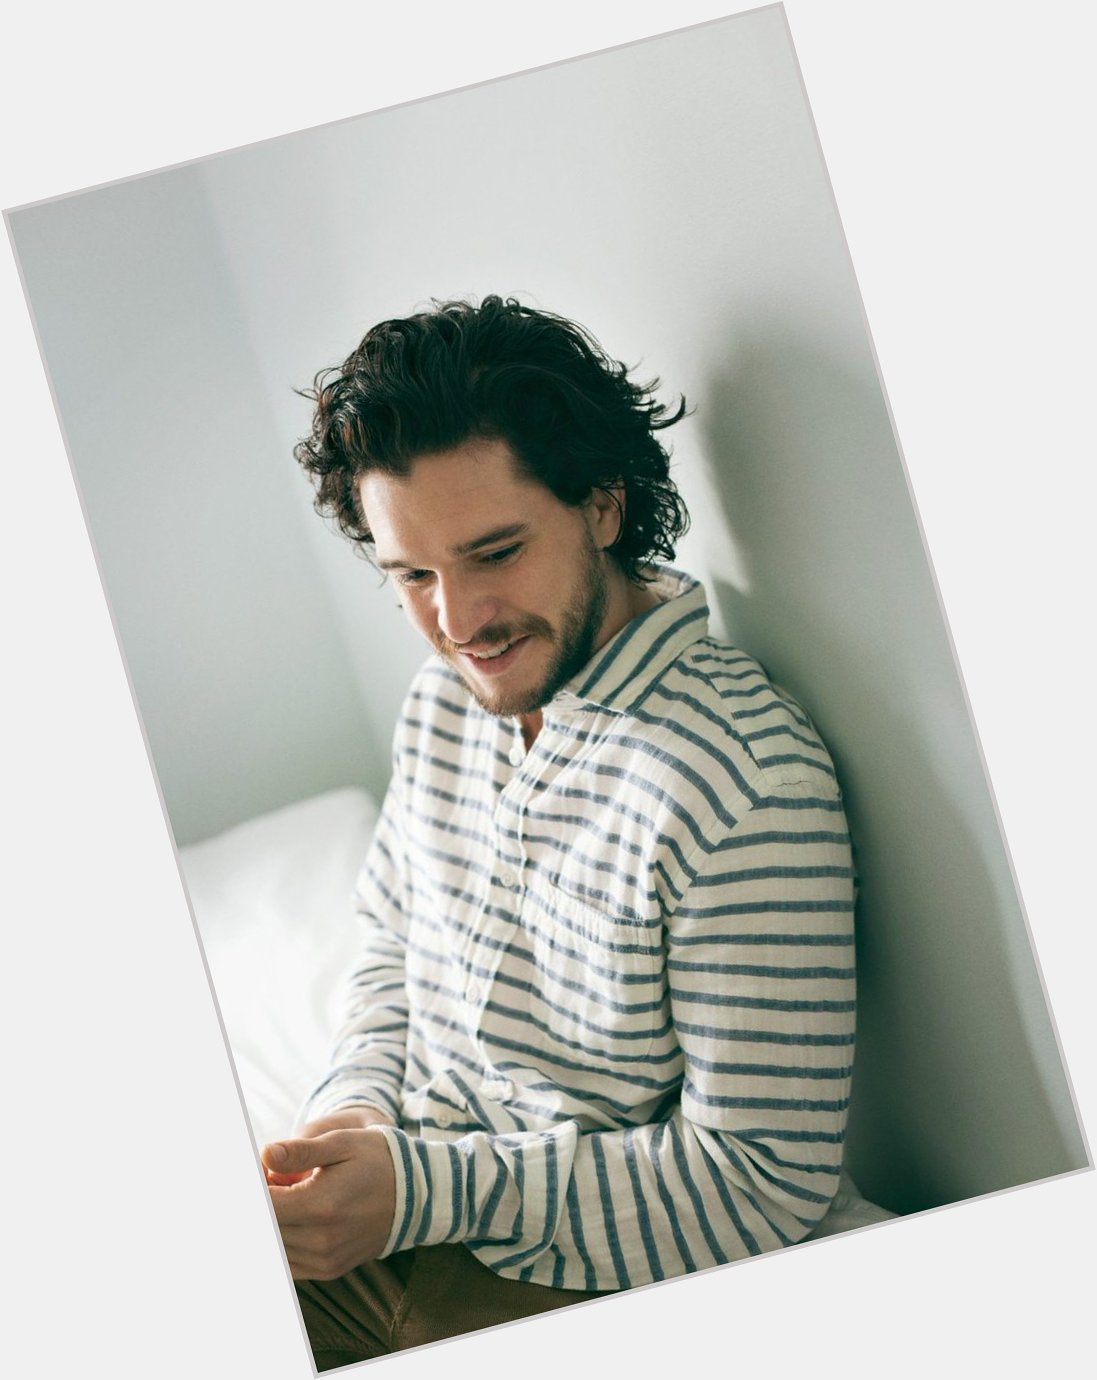 Happy birthday to the most adorable human being in the world aka kit harington  